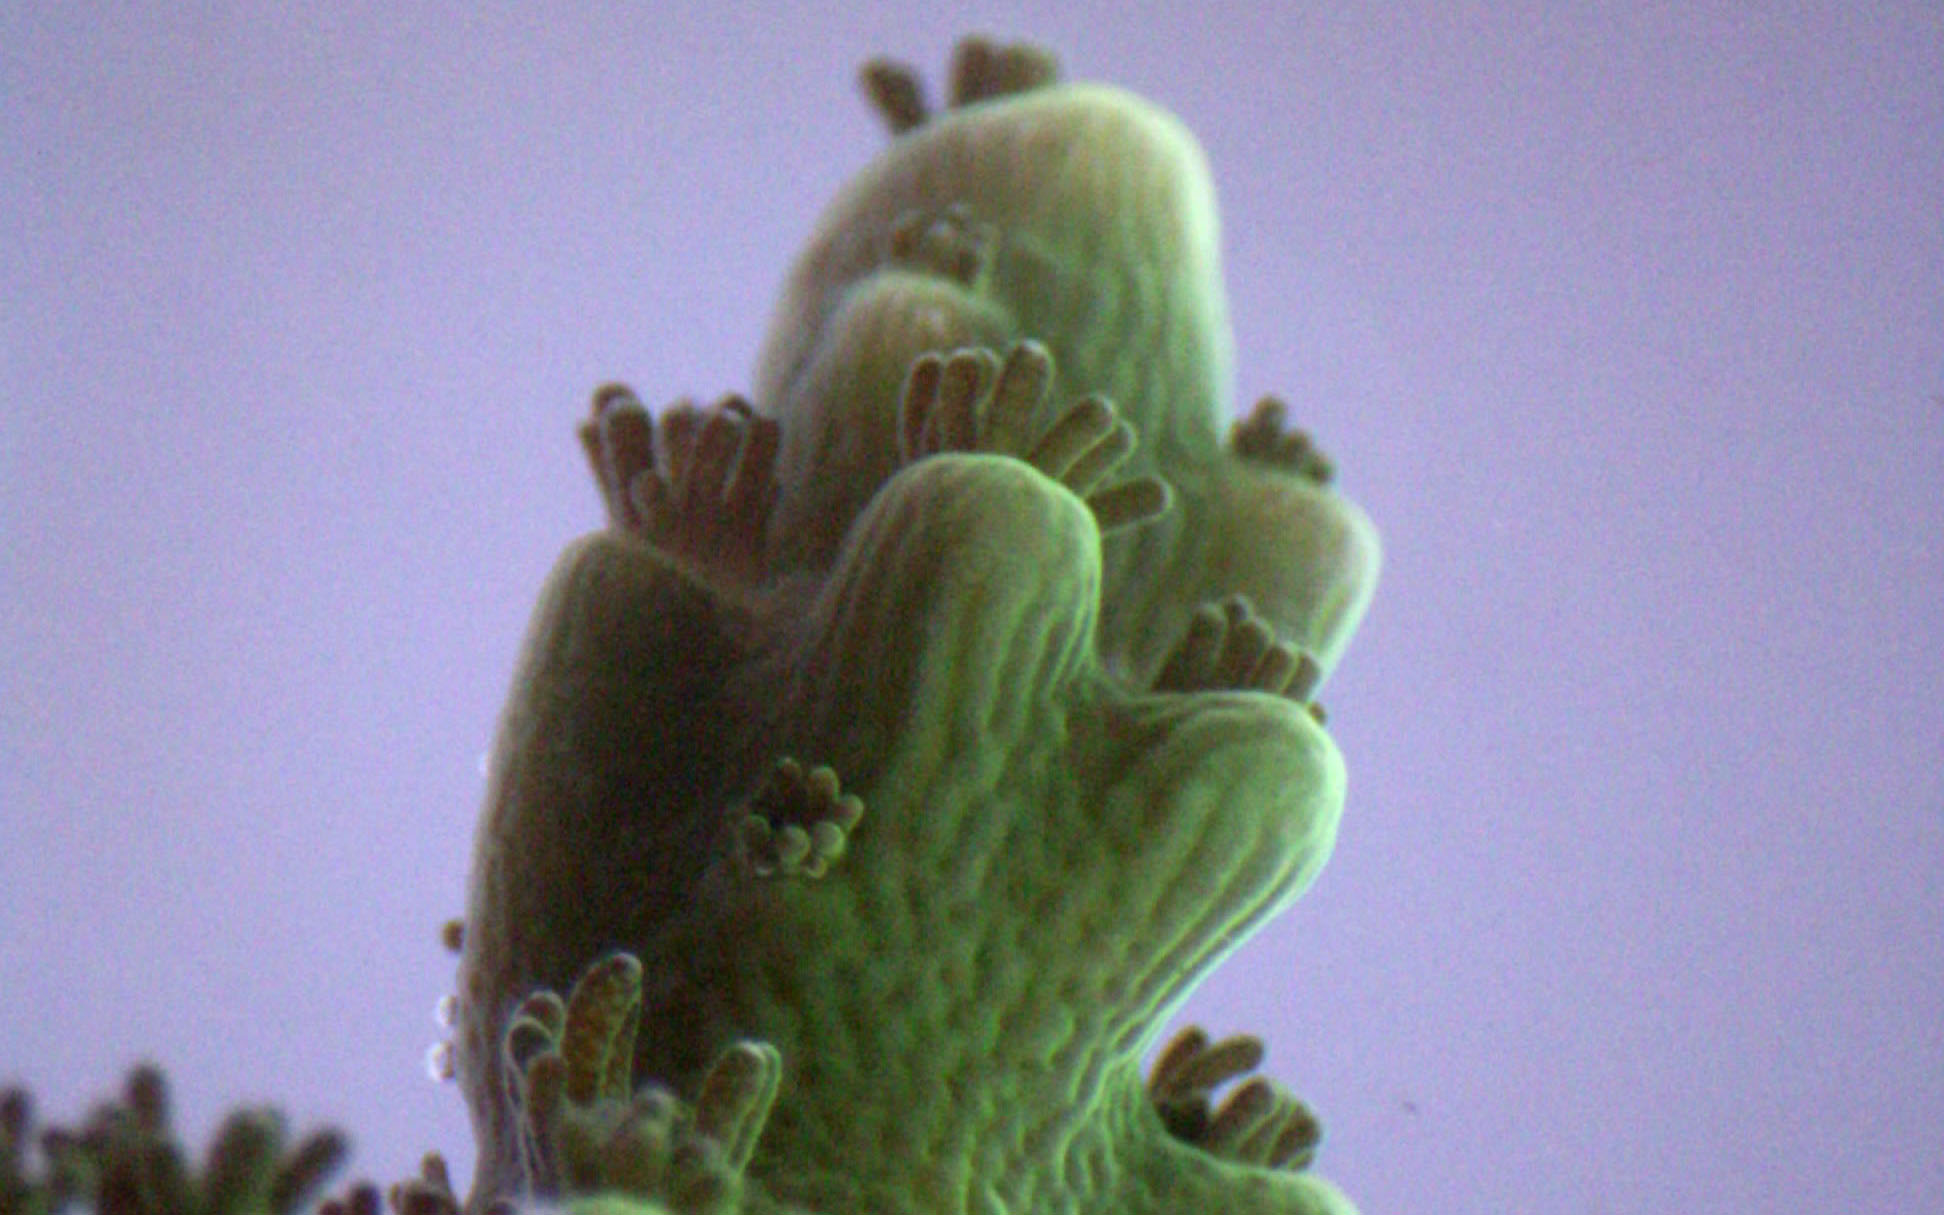 A branching Acropora yongei coral. This 40x magnified image was captured using a handheld digital microscope. Credit: Agnus Thies. 